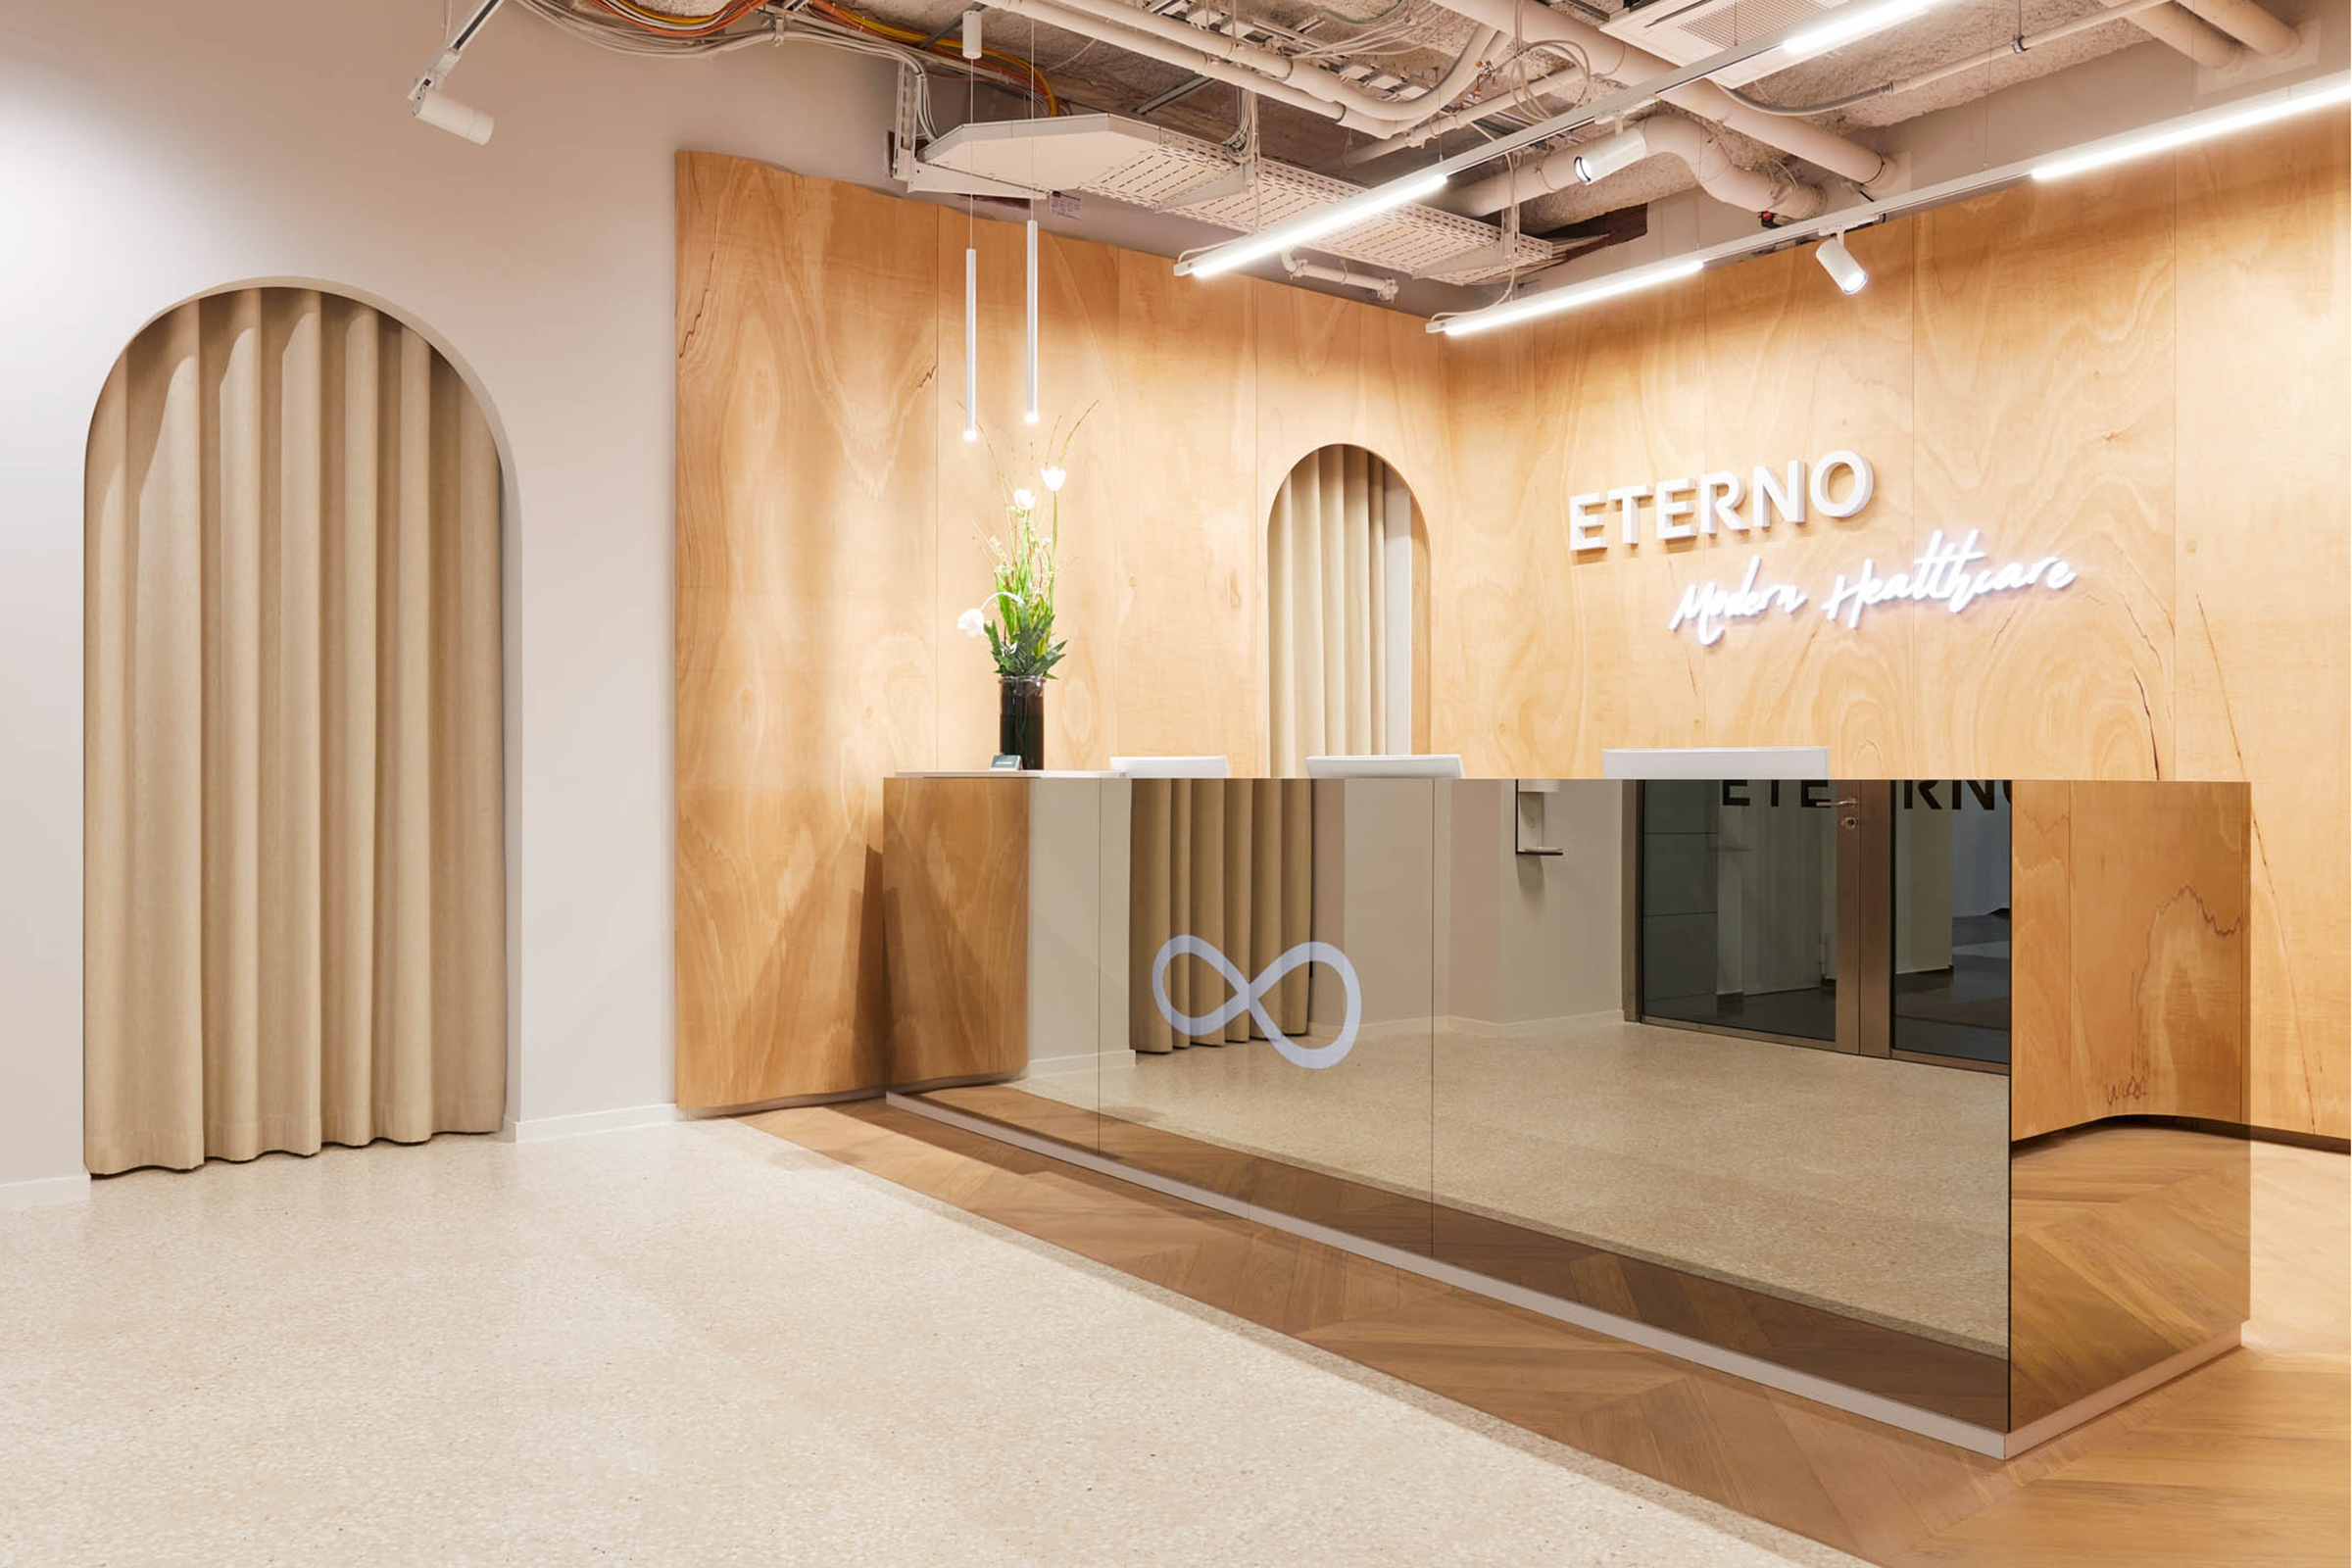 ETERNO - A Multidisciplinary Place For Well-Being by Ahochdrei Design